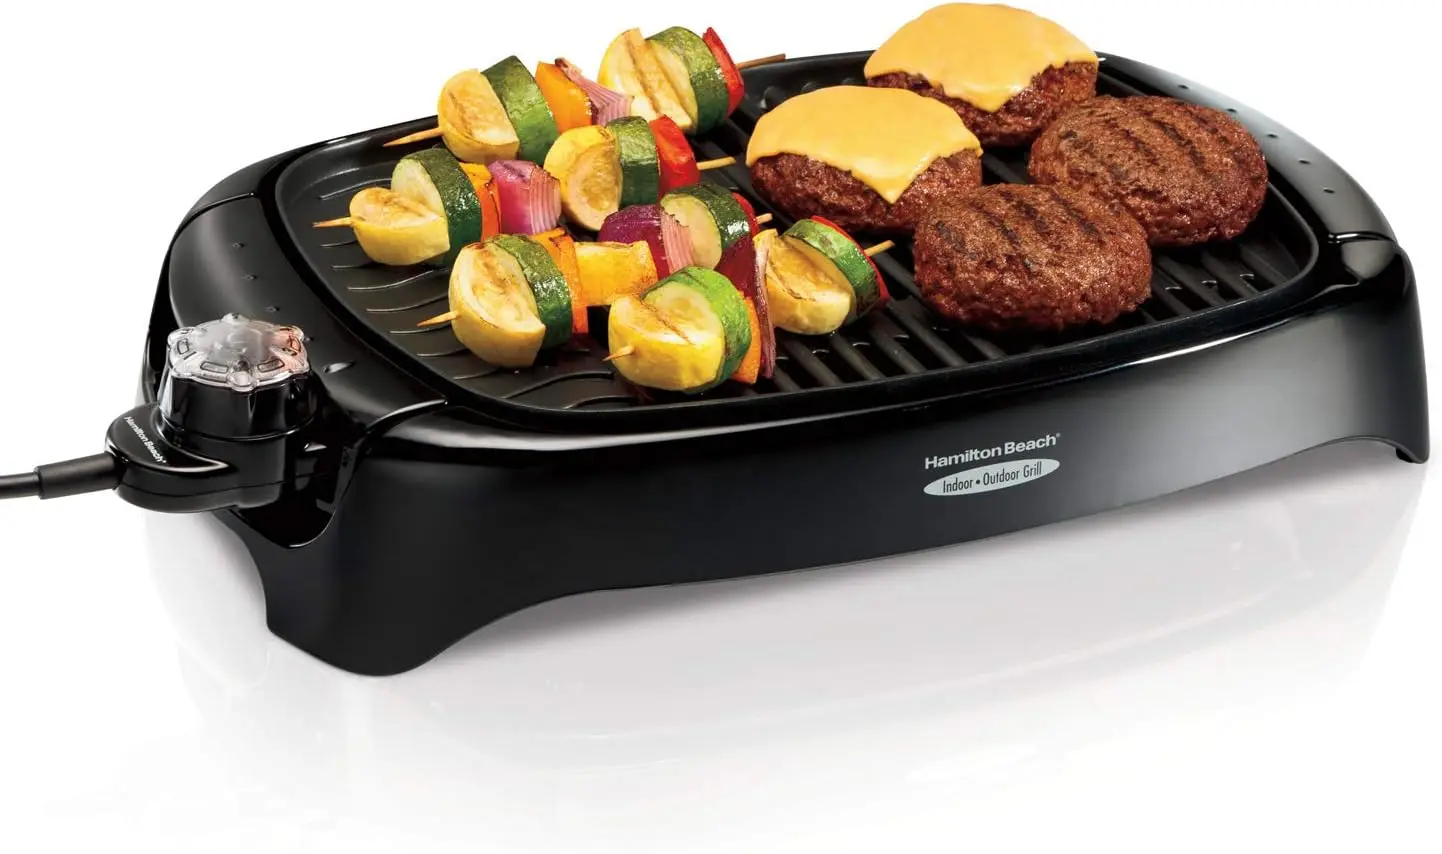 

100 sq. in. Surface Serves 8, Virtually Smokeless Grilling, Adjustable Temperature Control to 450F, Dishwasher Safe Removable No